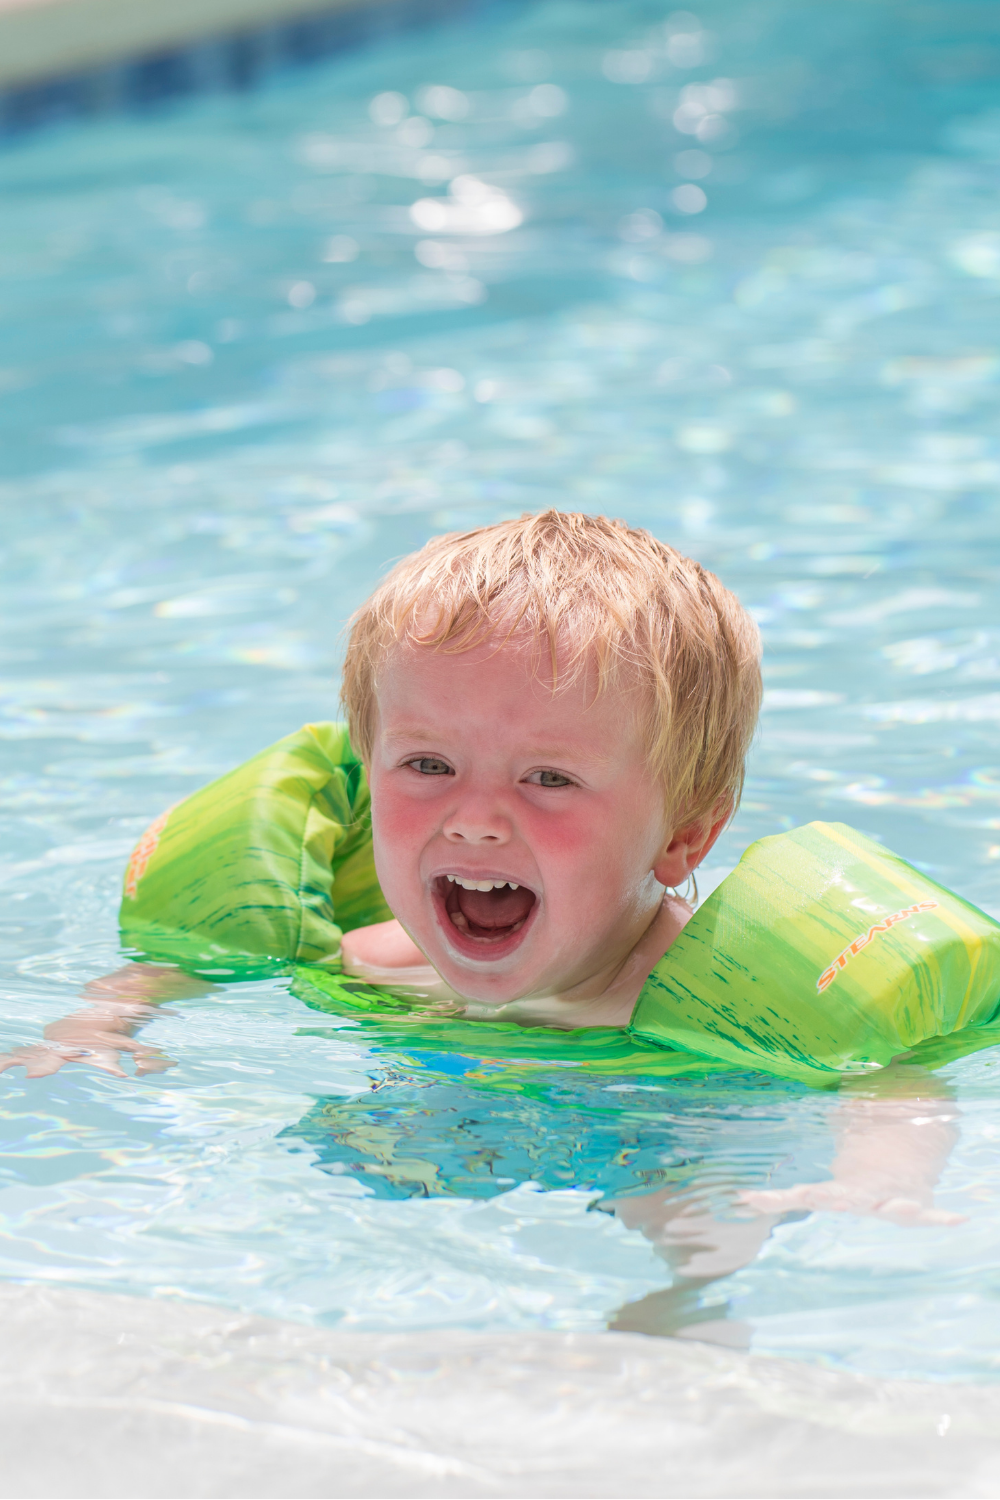 swim safety tips for infants, babies and toddlers